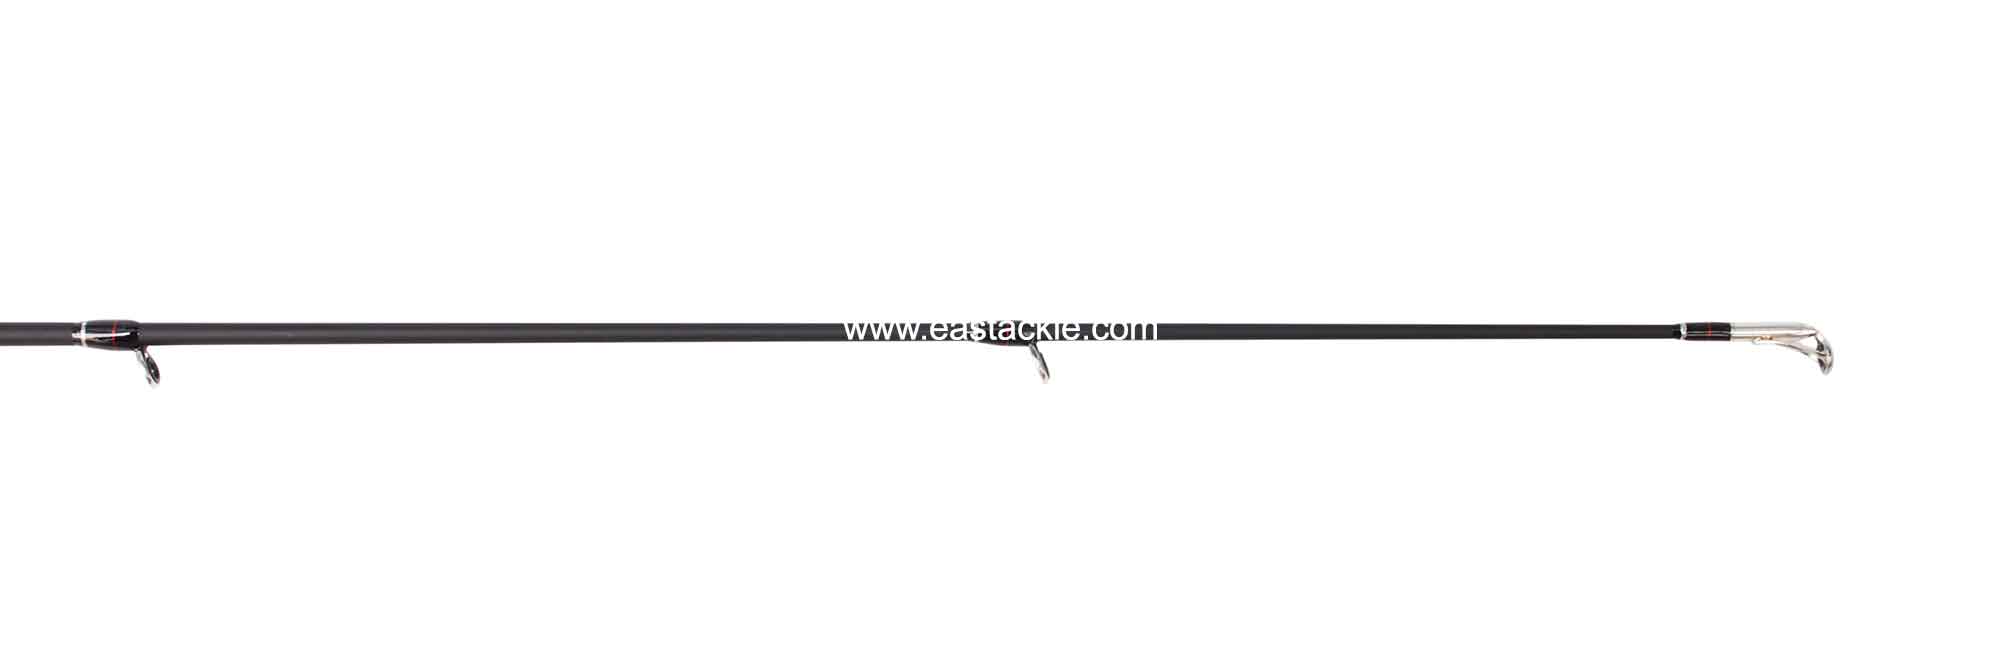 Megabass - Racing Condition World Edition - RCS-862MH - Spinning Rod - Tip Section